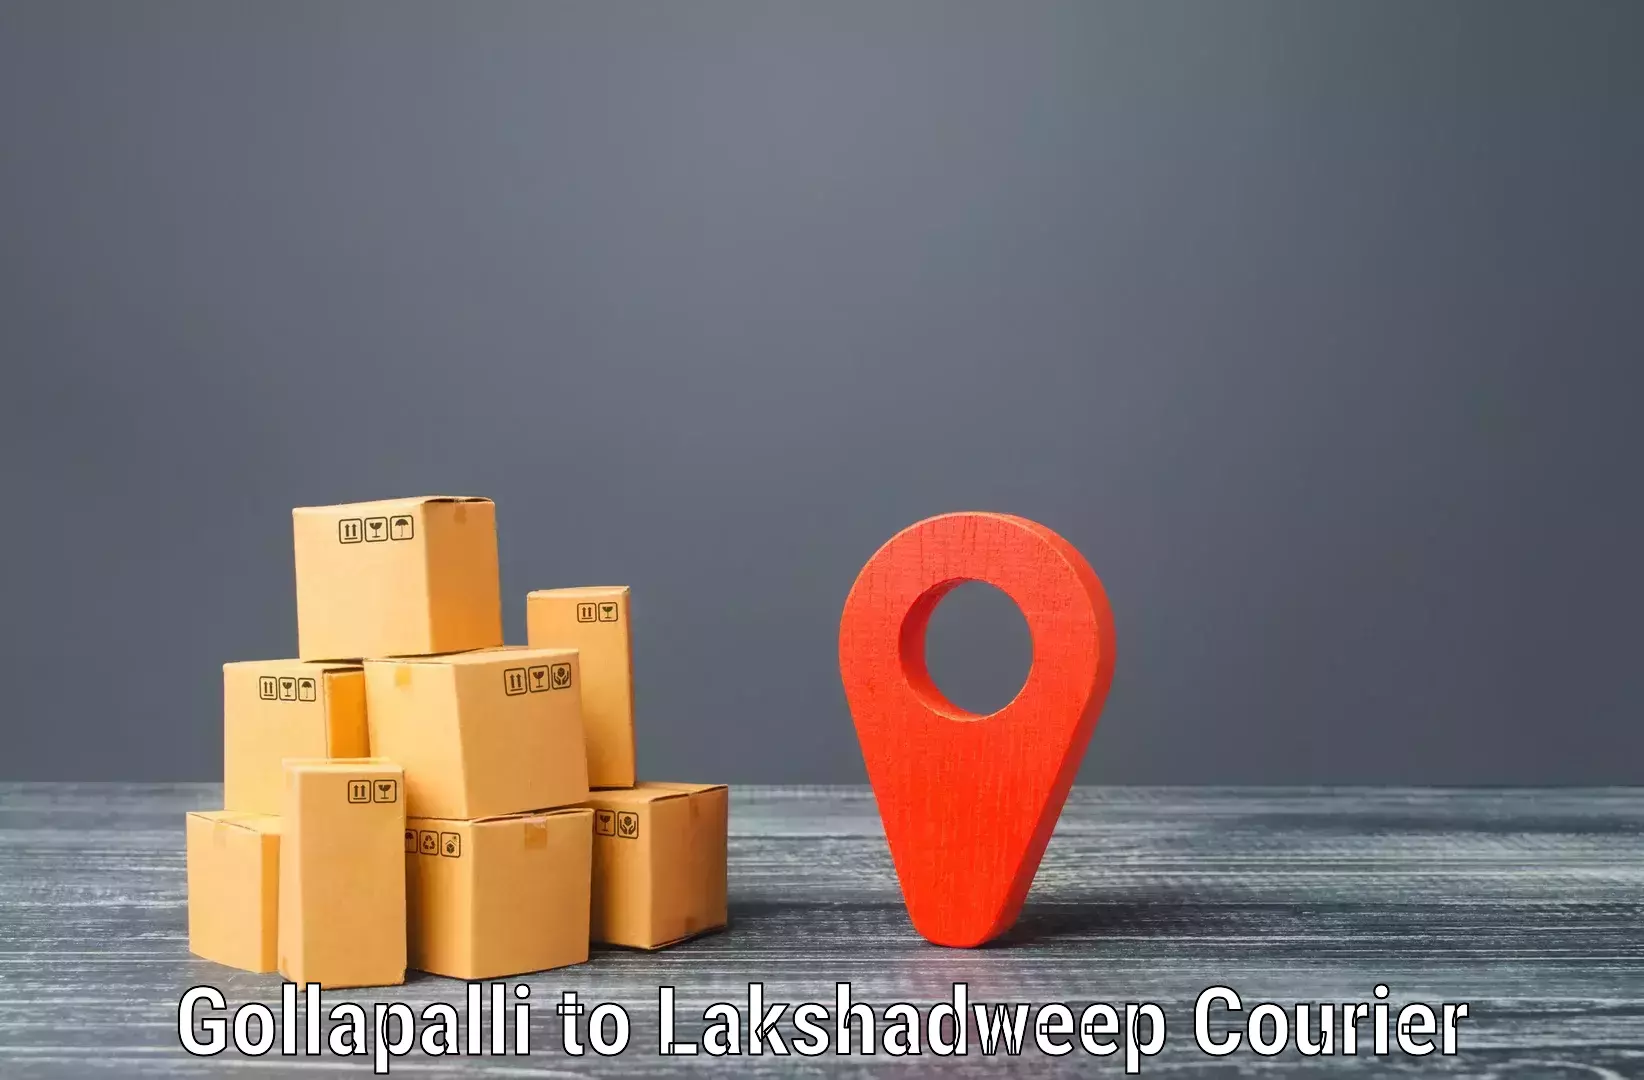 Modern courier technology Gollapalli to Lakshadweep